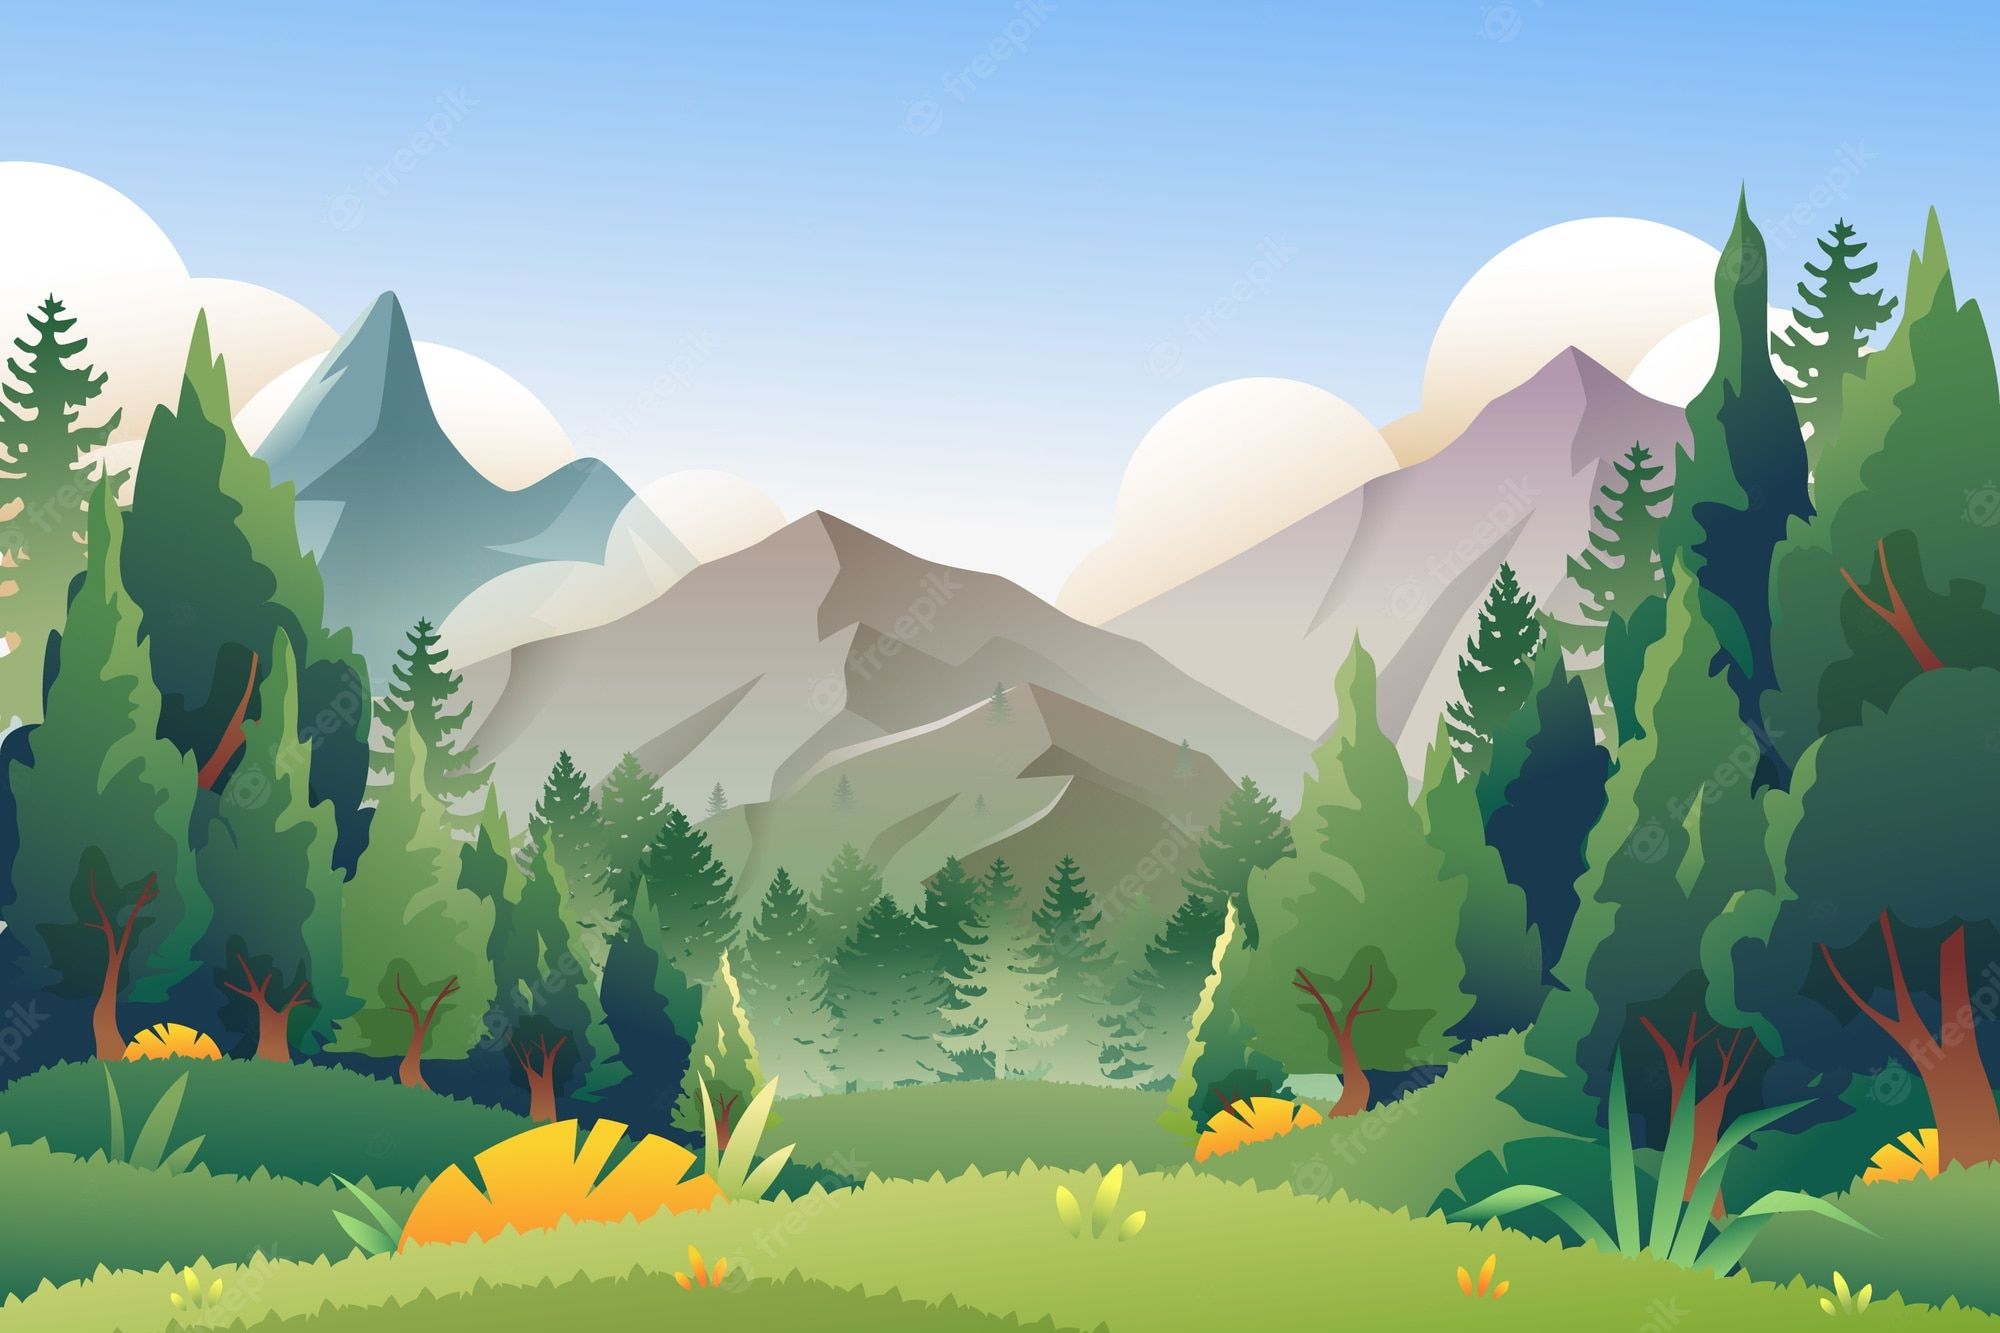 A cartoon image of a forest with trees, grass, mountains, and clouds - Vector